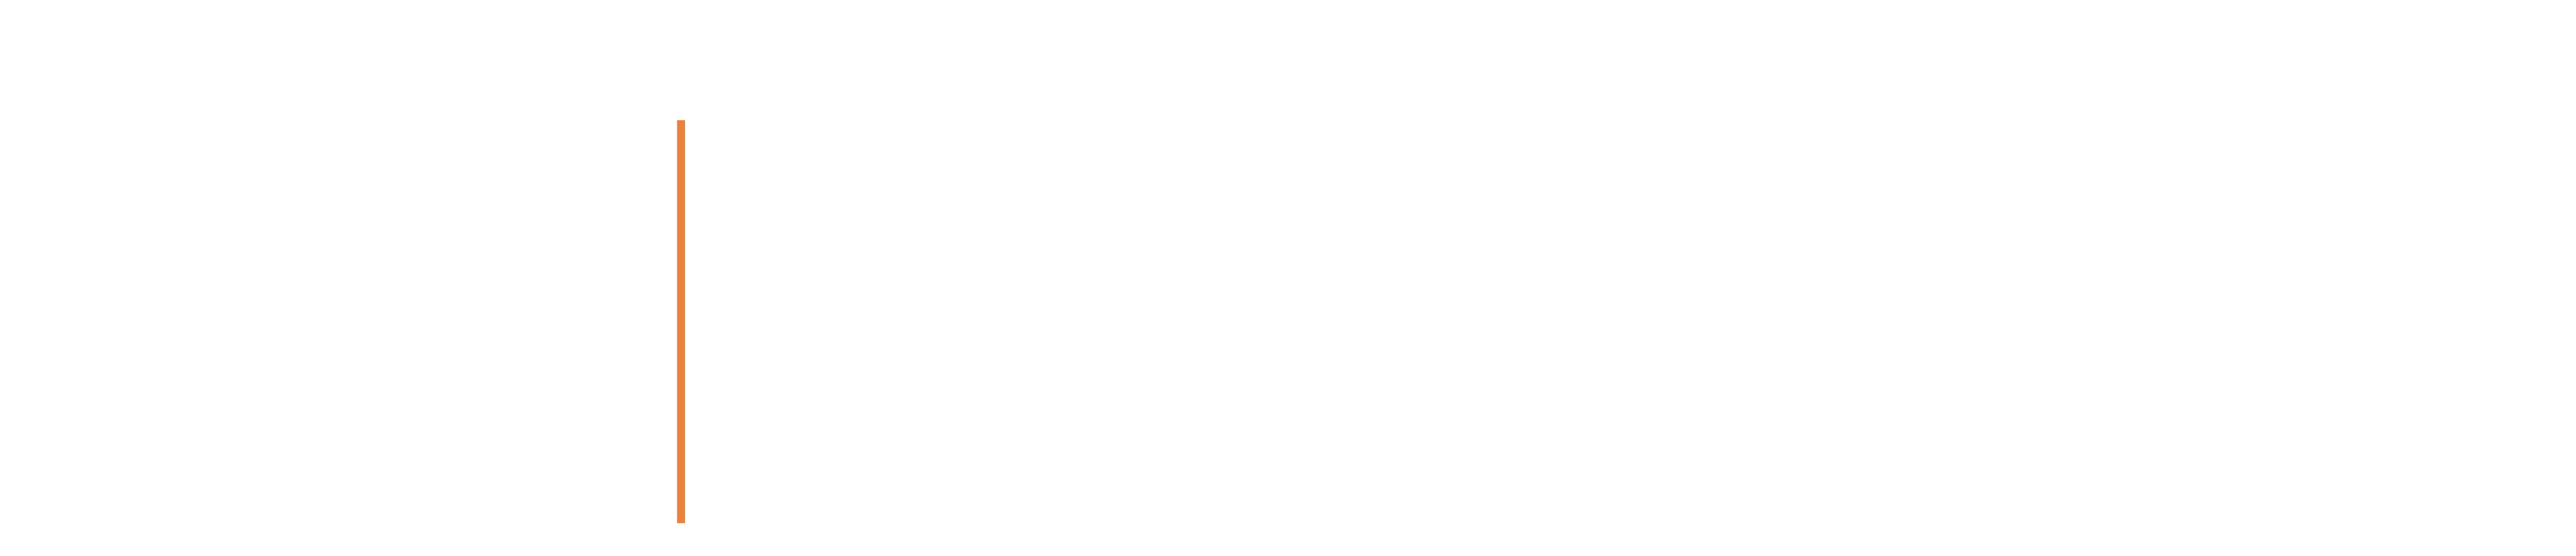 UFLI Logo and Link to Homepage